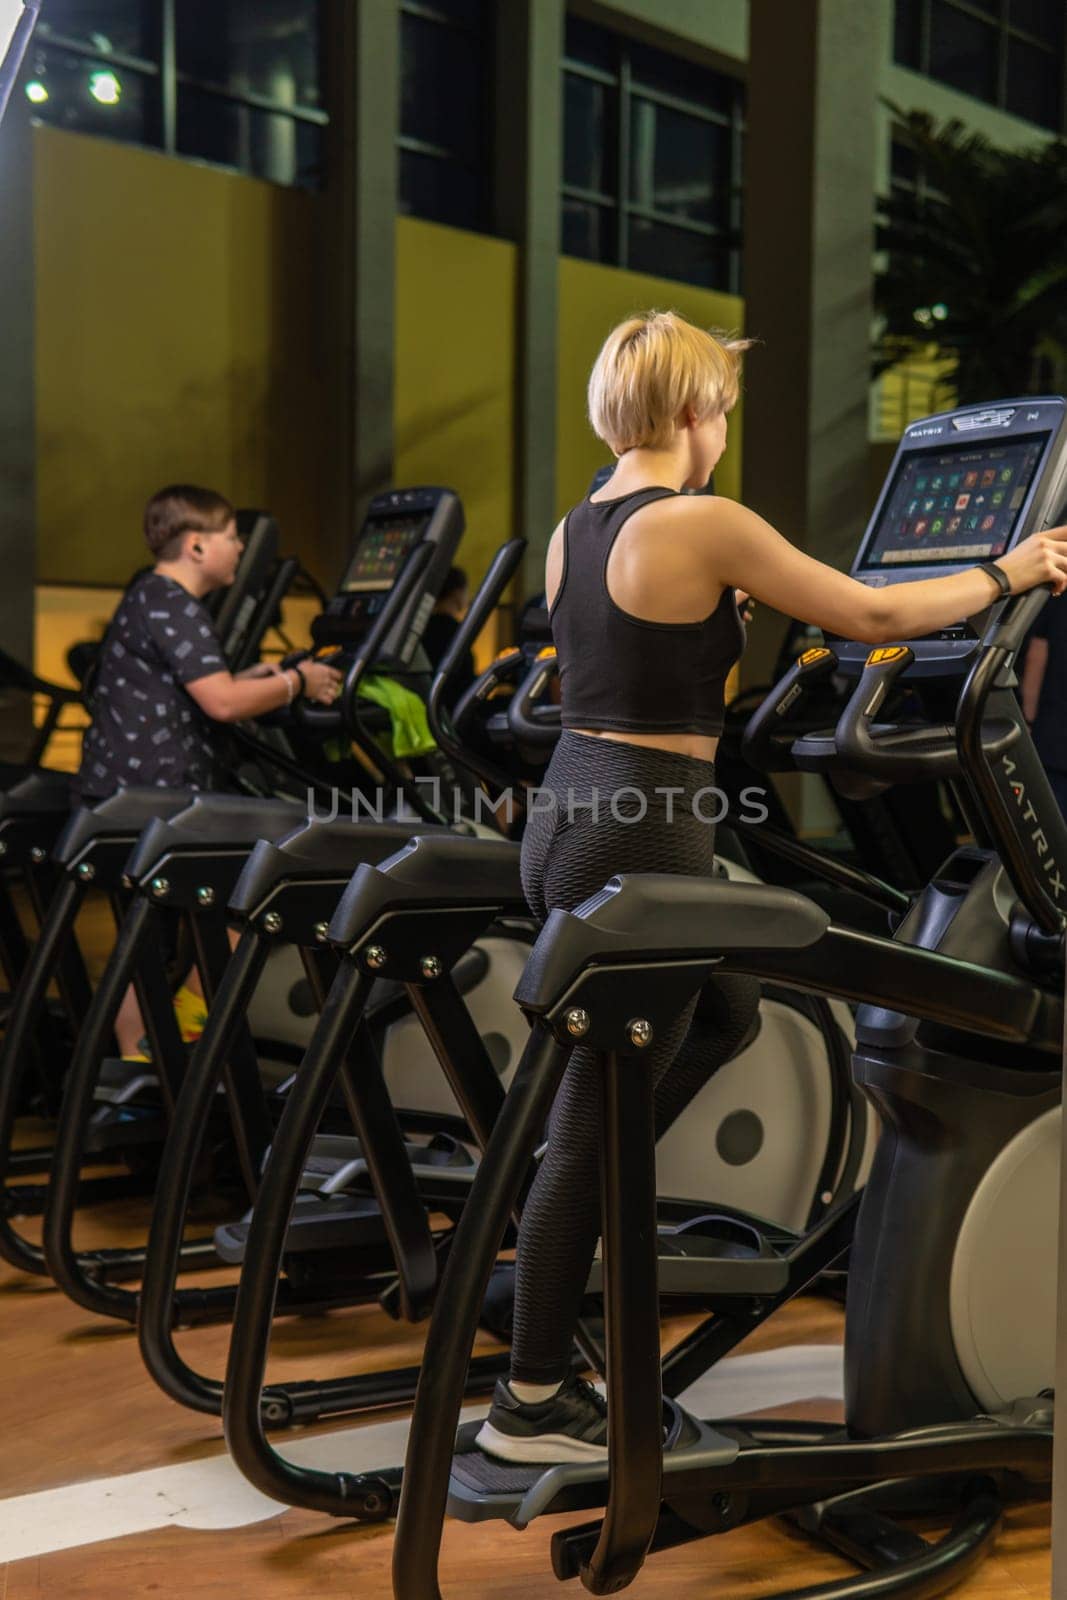 Elliptical trainer young training health, In the afternoon fitness gym for cross healthy coach, class elliptical. Cardio lifestyle background, trainer